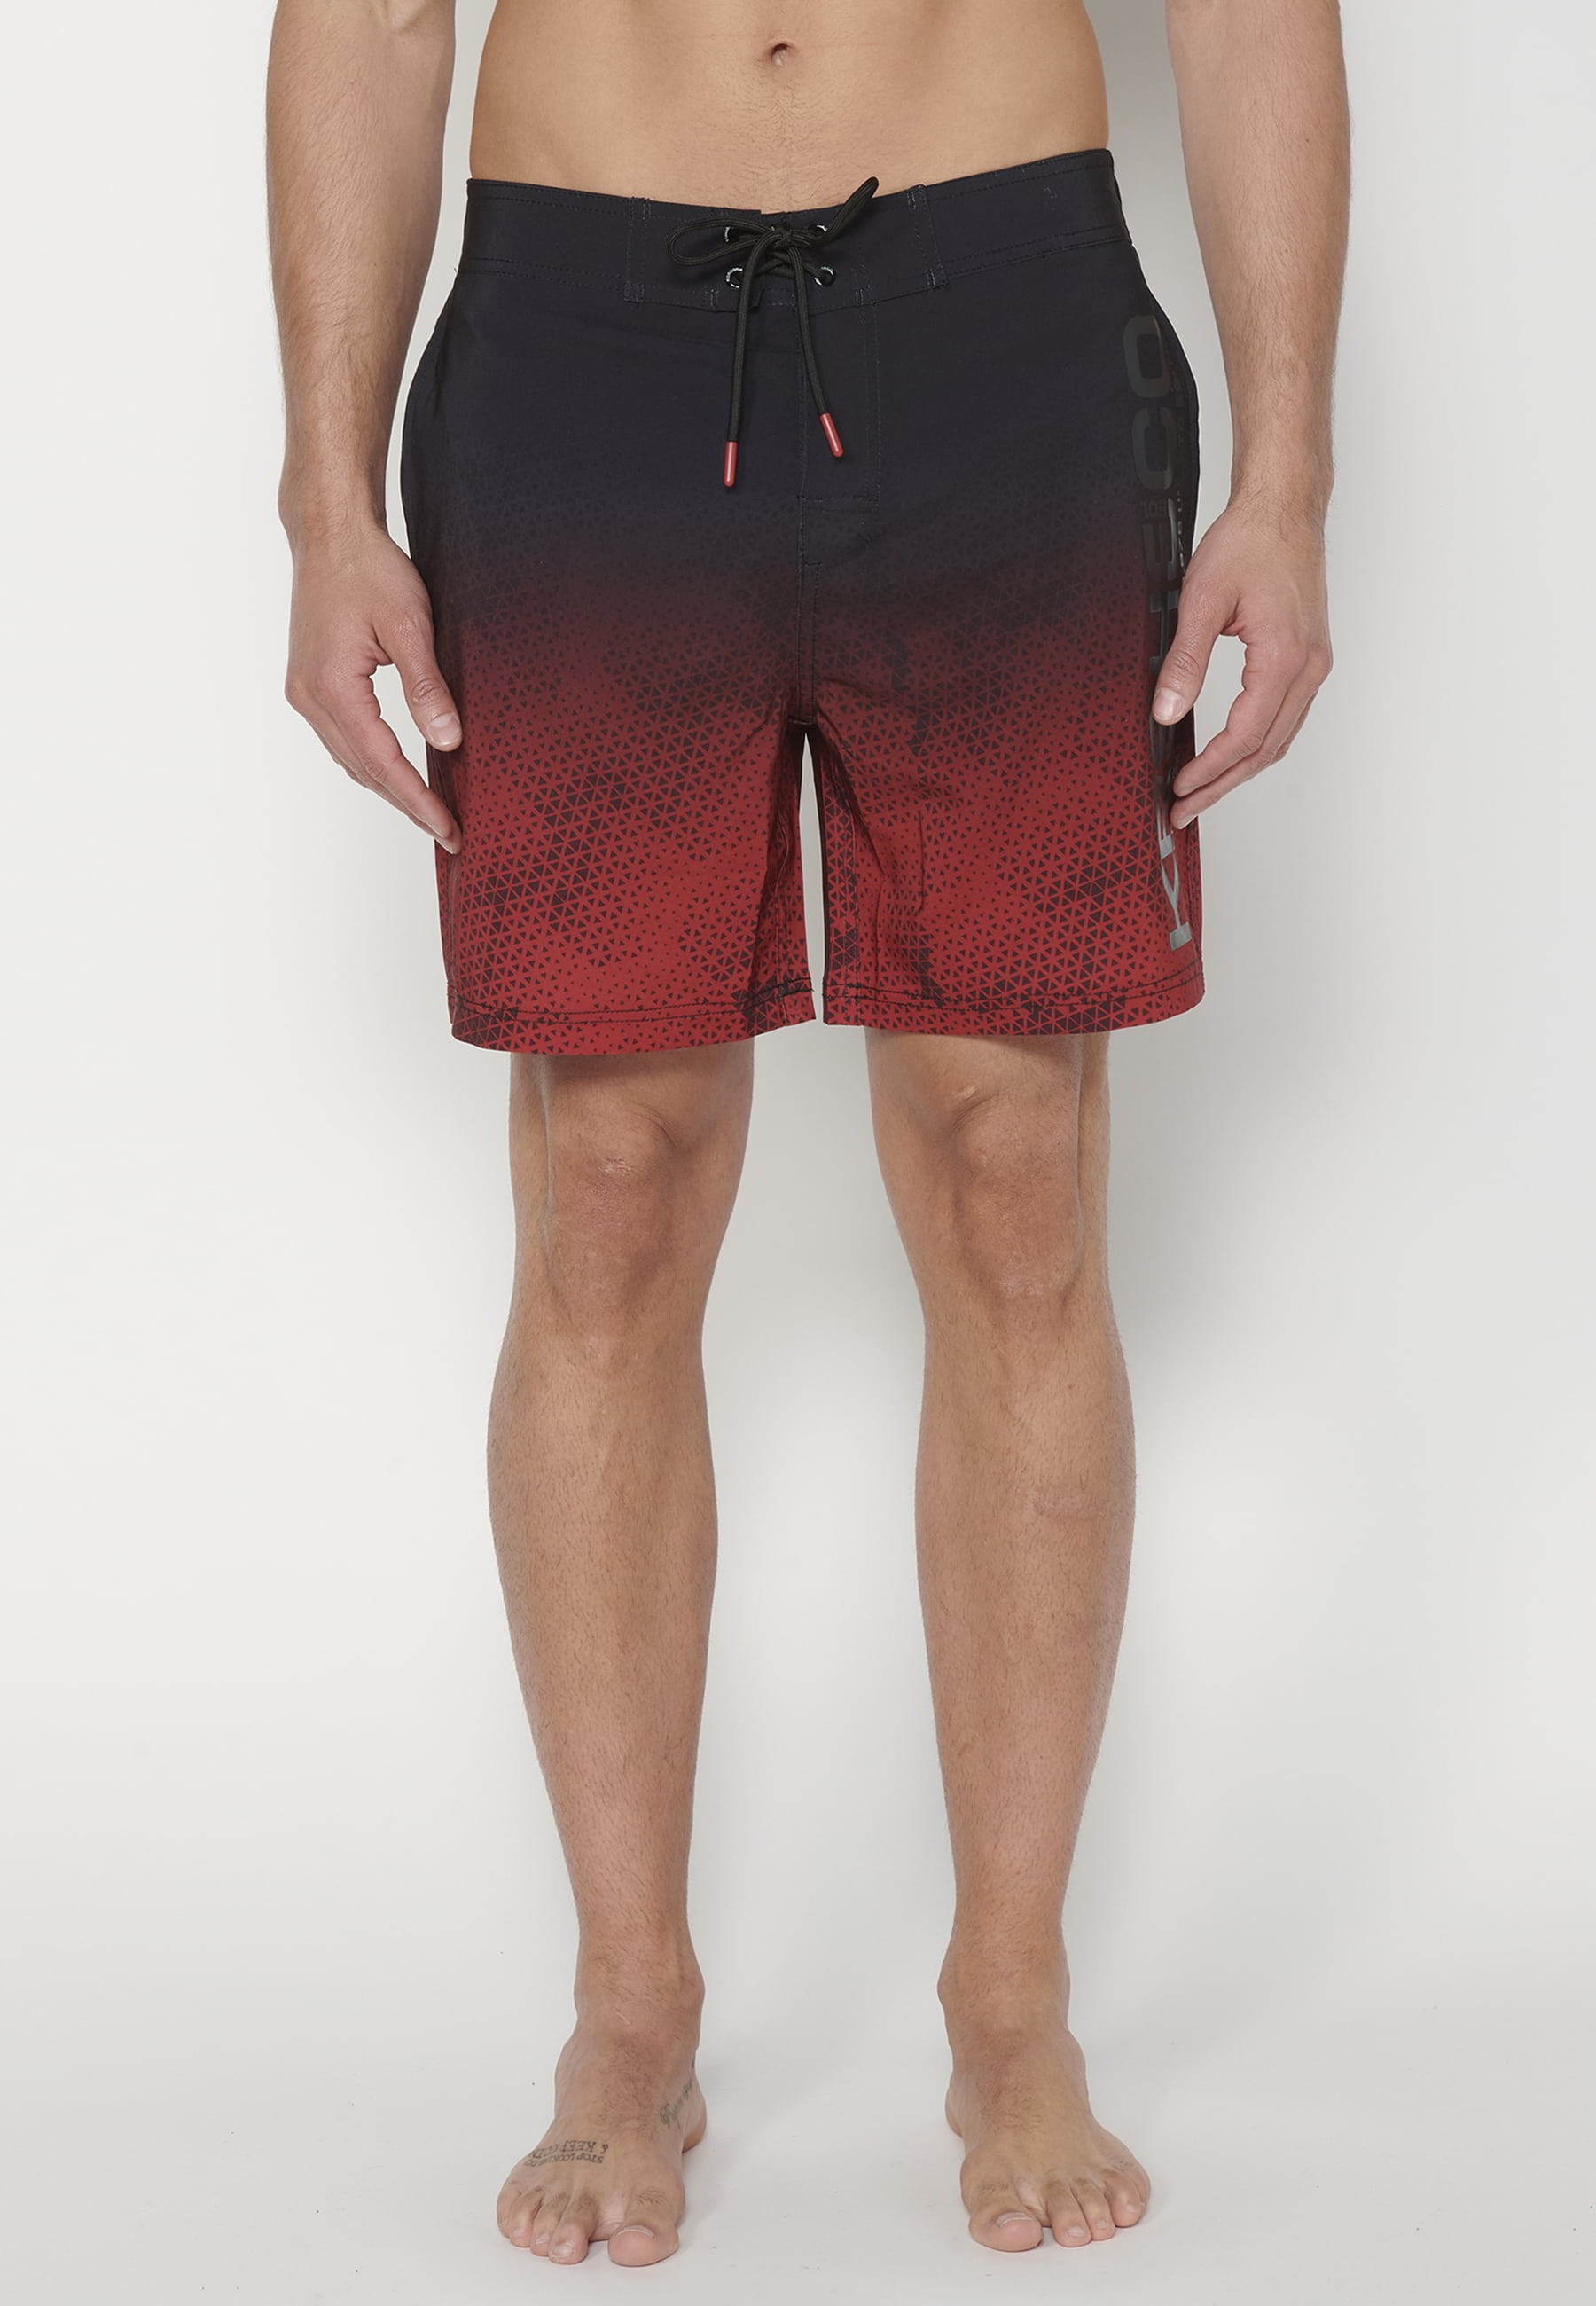 Short Surfer style swimsuit with three Red Pockets for Men